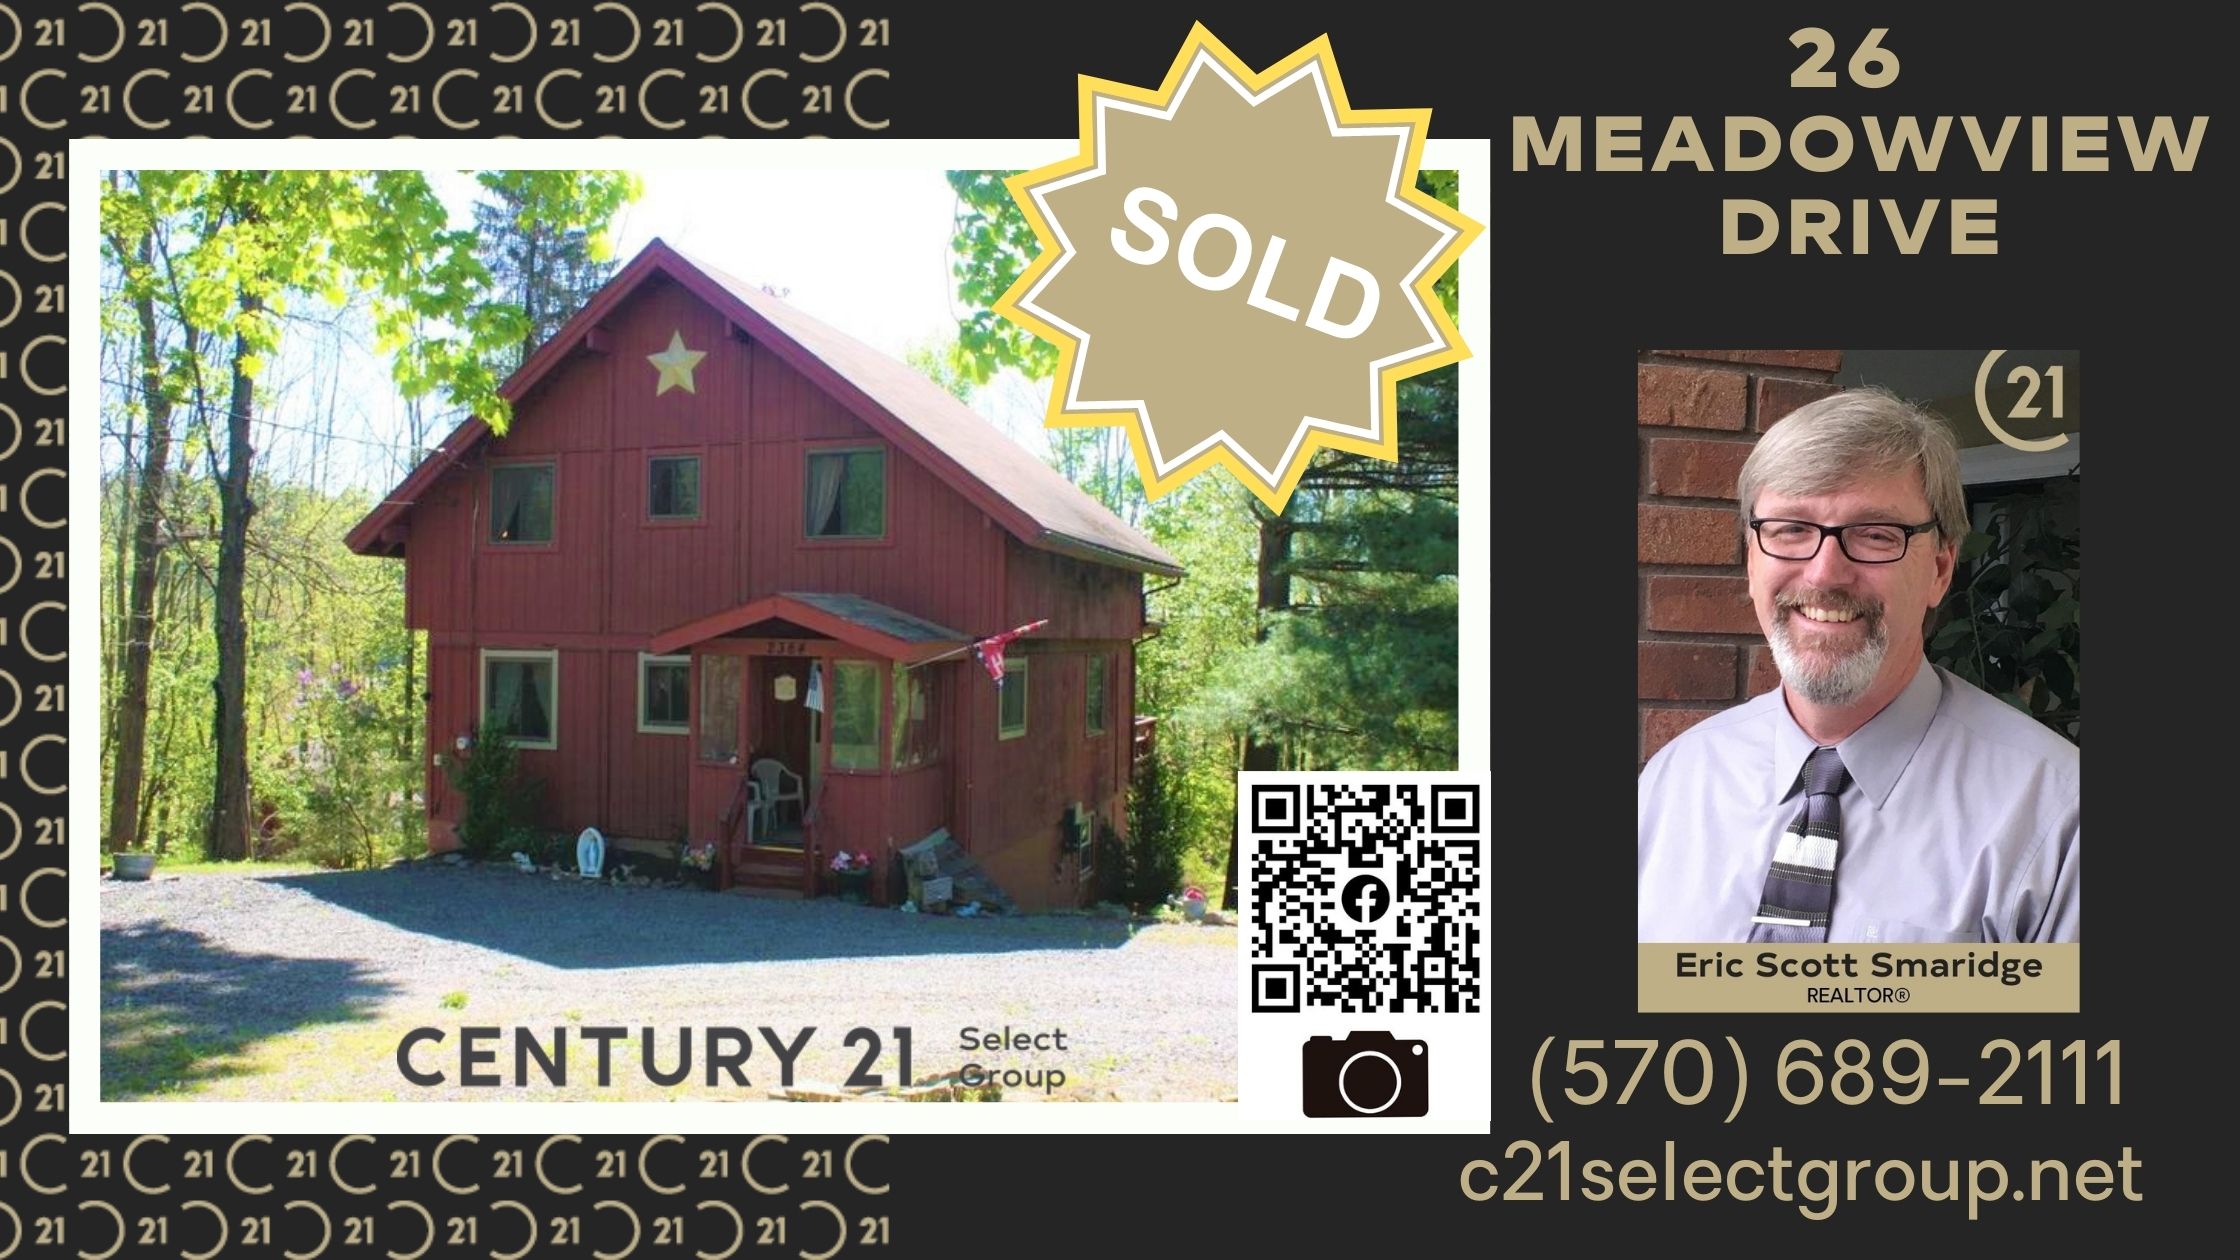 SOLD! 26 Meadowview Drive: The Hideout